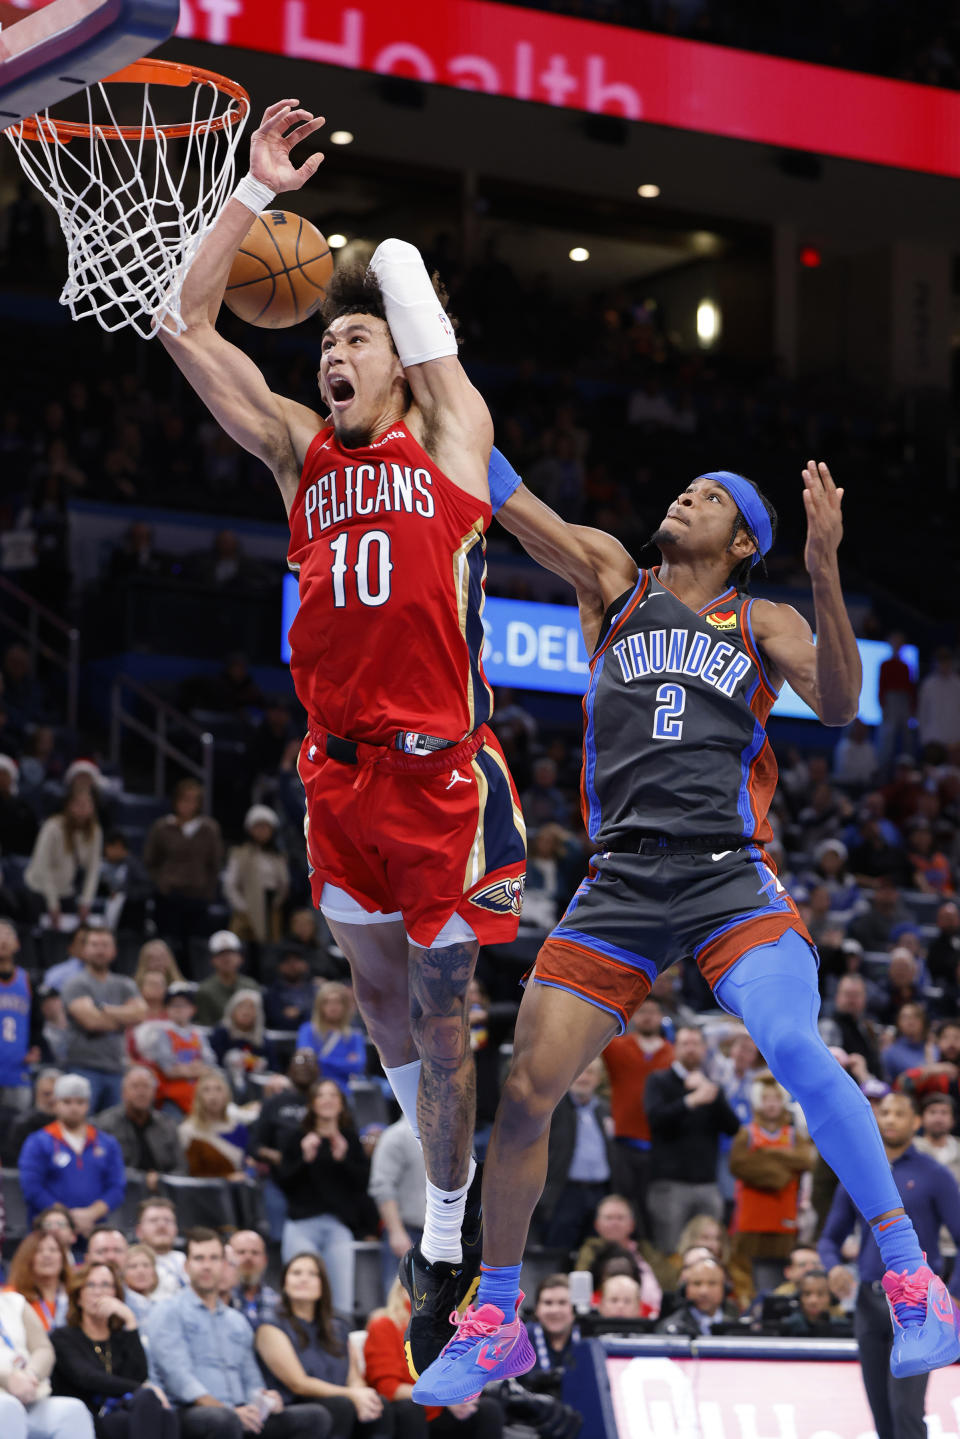 New Orleans Pelicans center Jaxson Hayes (10) is fouled by Oklahoma City Thunder guard Shai Gilgeous-Alexander (2) during the second half of an NBA basketball game Friday, Dec. 23, 2022, in Oklahoma City. (AP Photo/Garett Fisbeck)